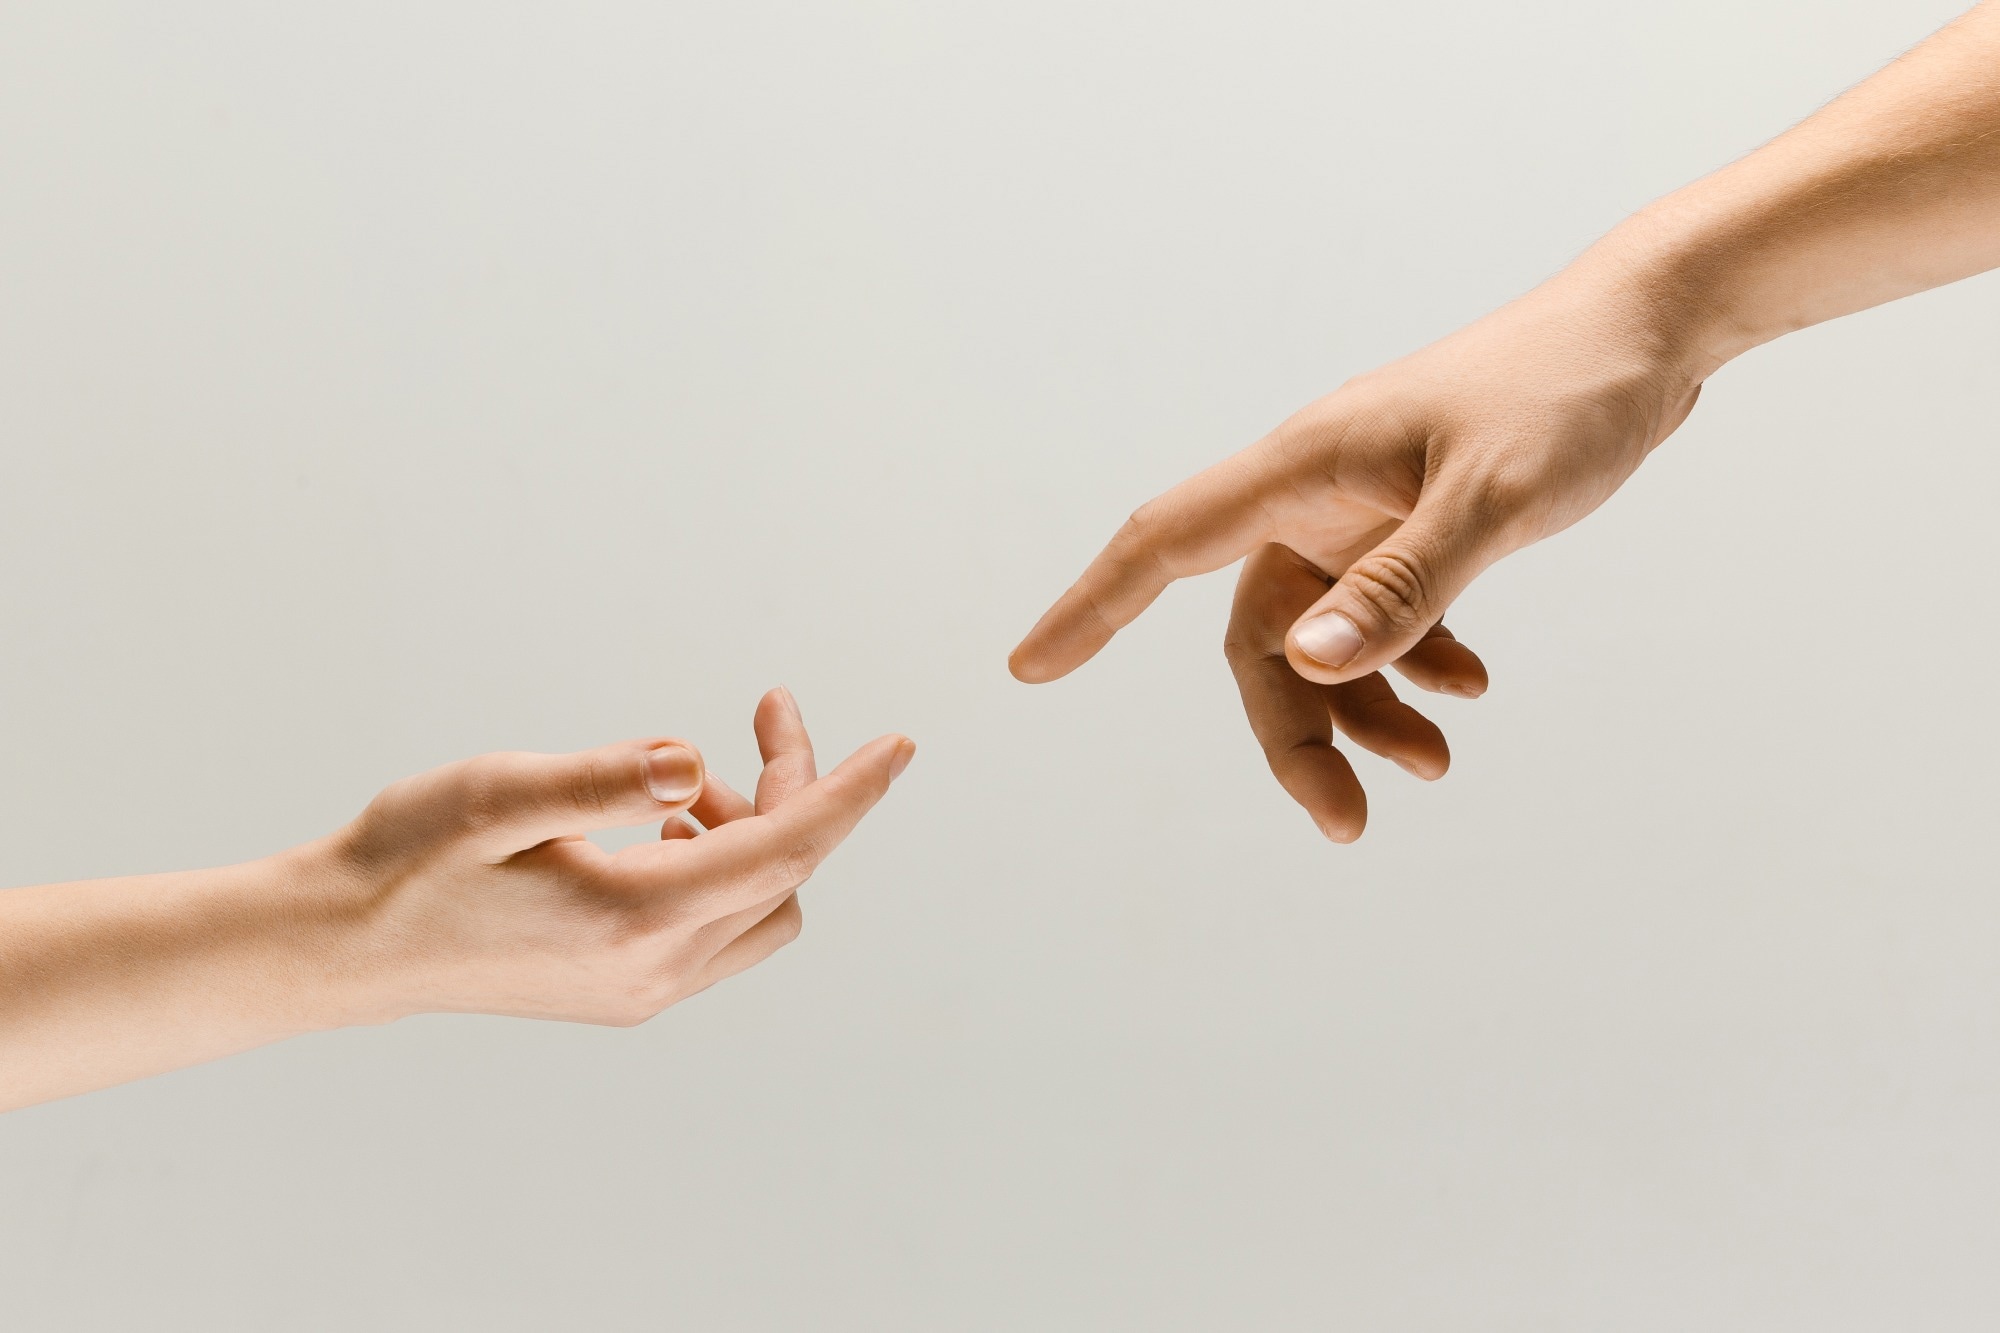 Study: The physical and mental health benefits of touch interventions: A comparative systematic review and multivariate meta-analysis. Image Credit: Master1305/Shutterstock.com